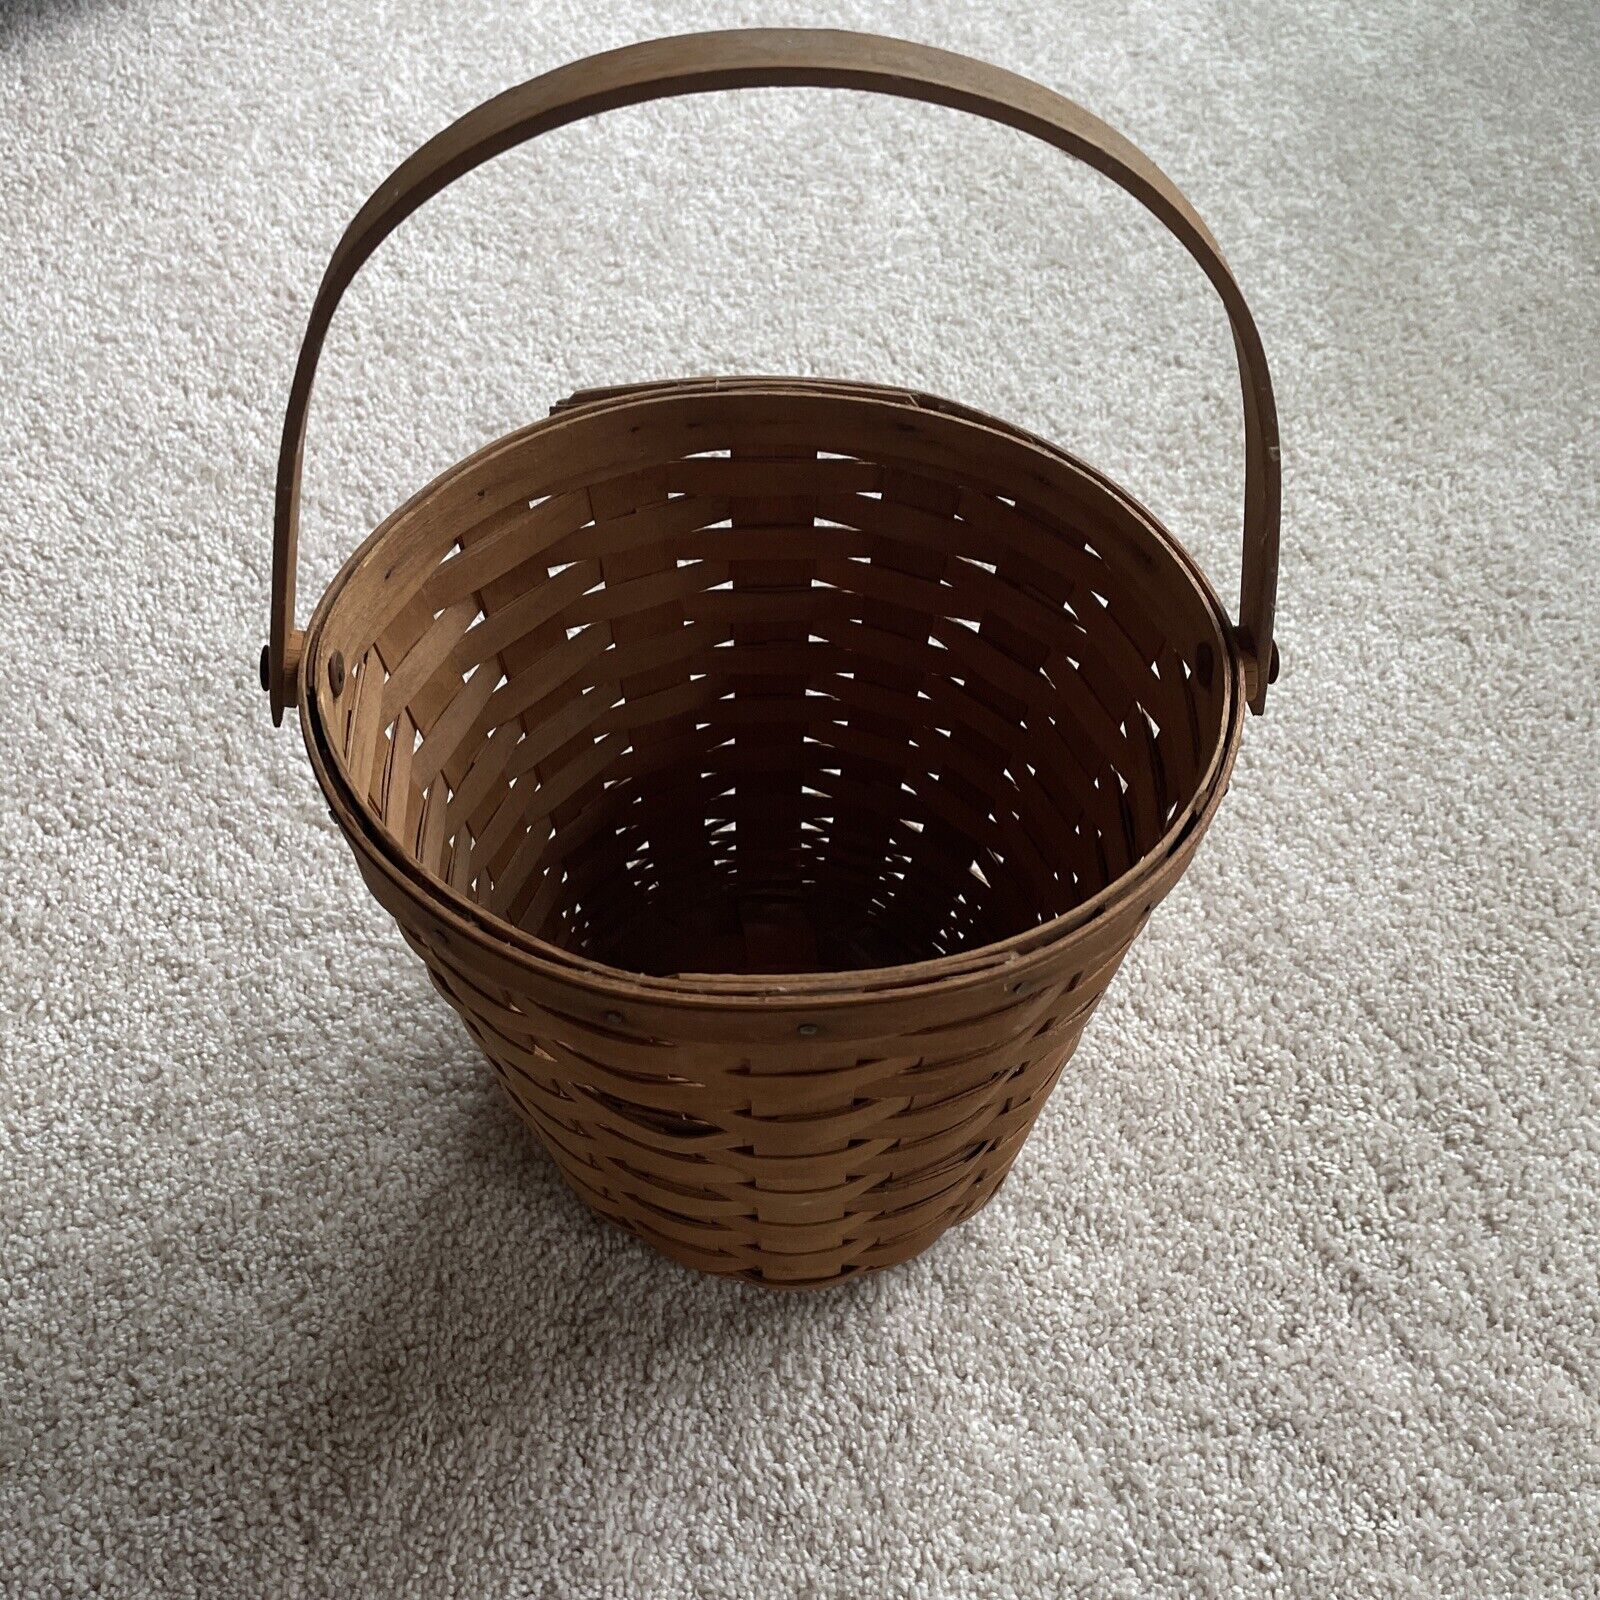 Longaberger Vintage 1987  7 Inch Fruit Basket Signed And Hand Woven Great Cond.